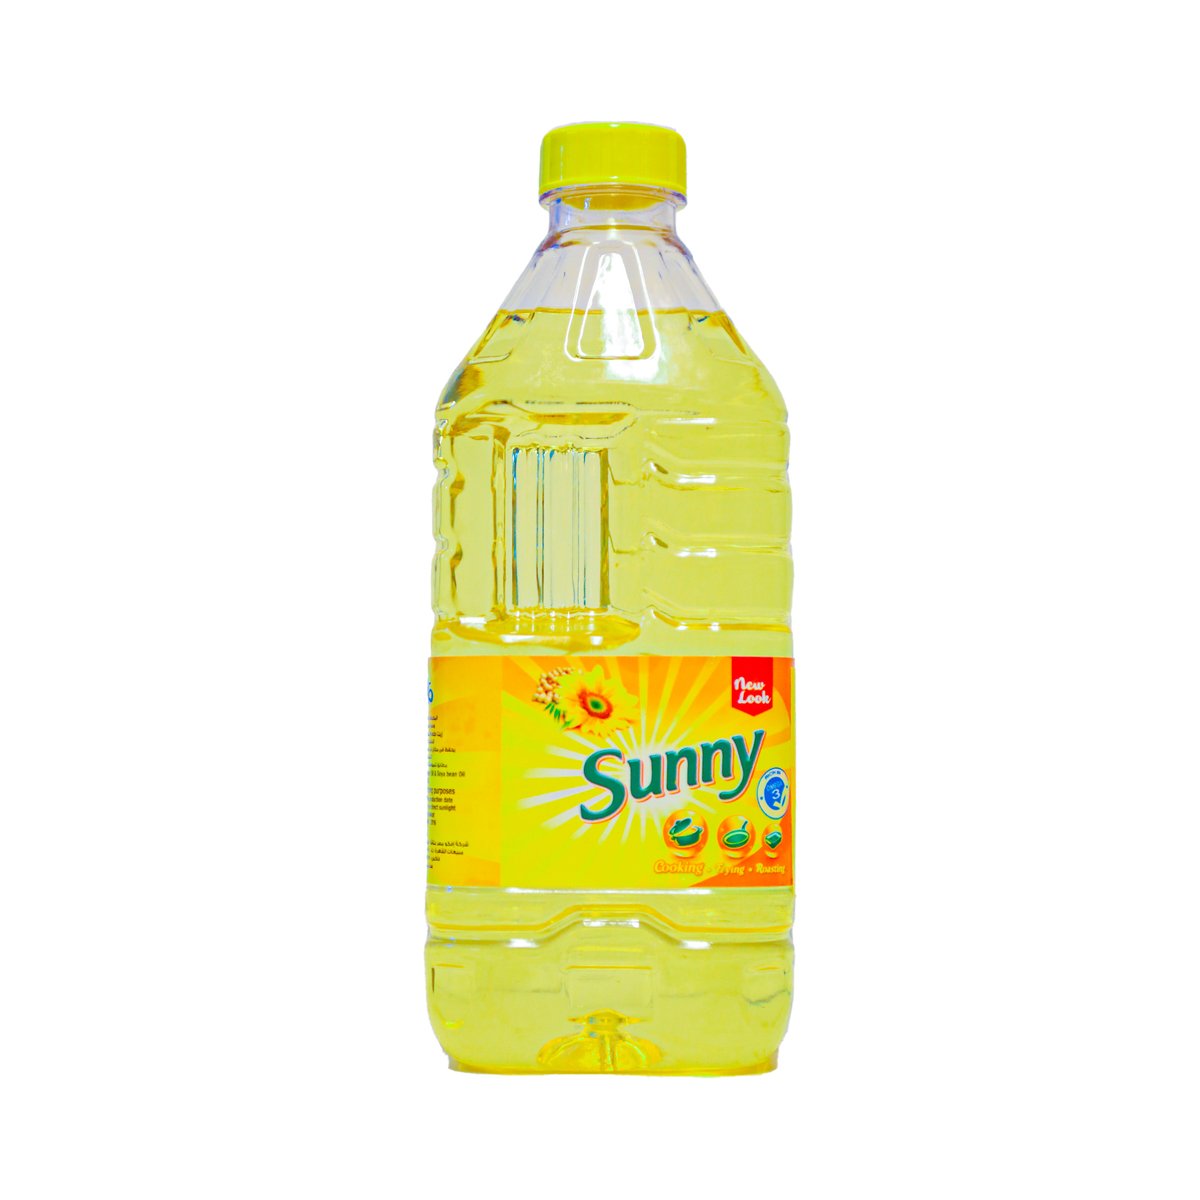 Sunny Cooking Oil 1.75 Litres